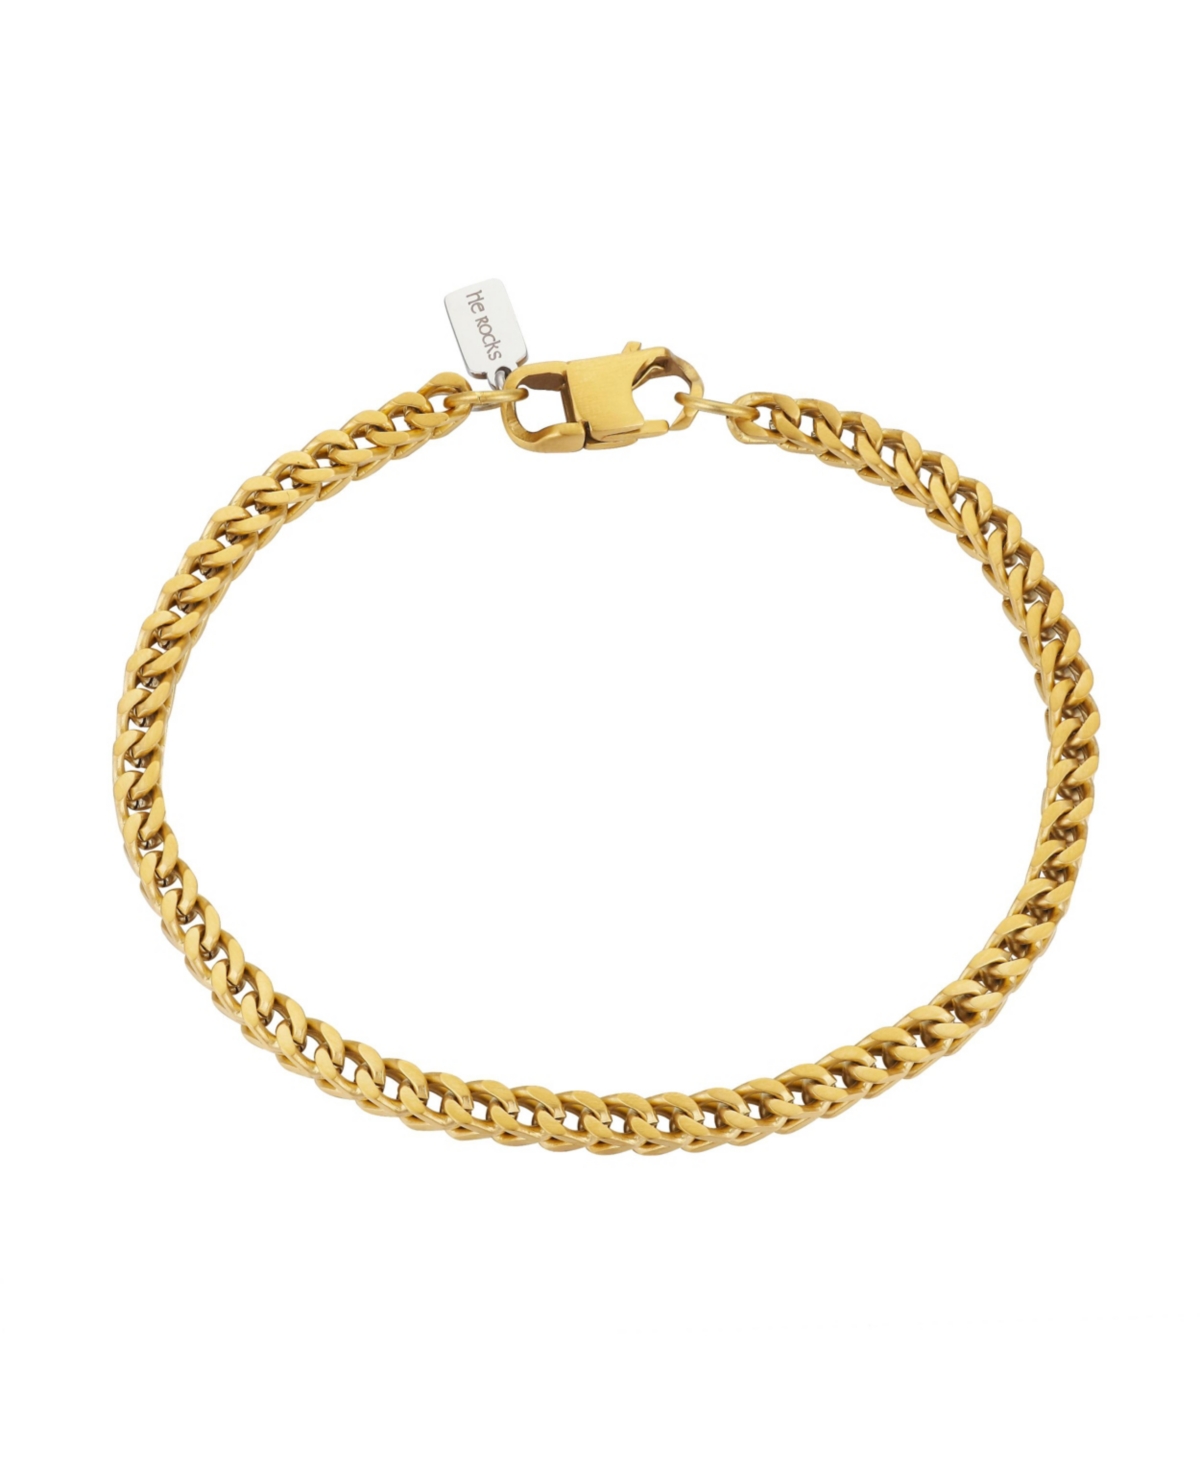 He Rocks Brushed Gold Tone Stainless Steel 4mm Franco Chain Bracelet, 8.5"